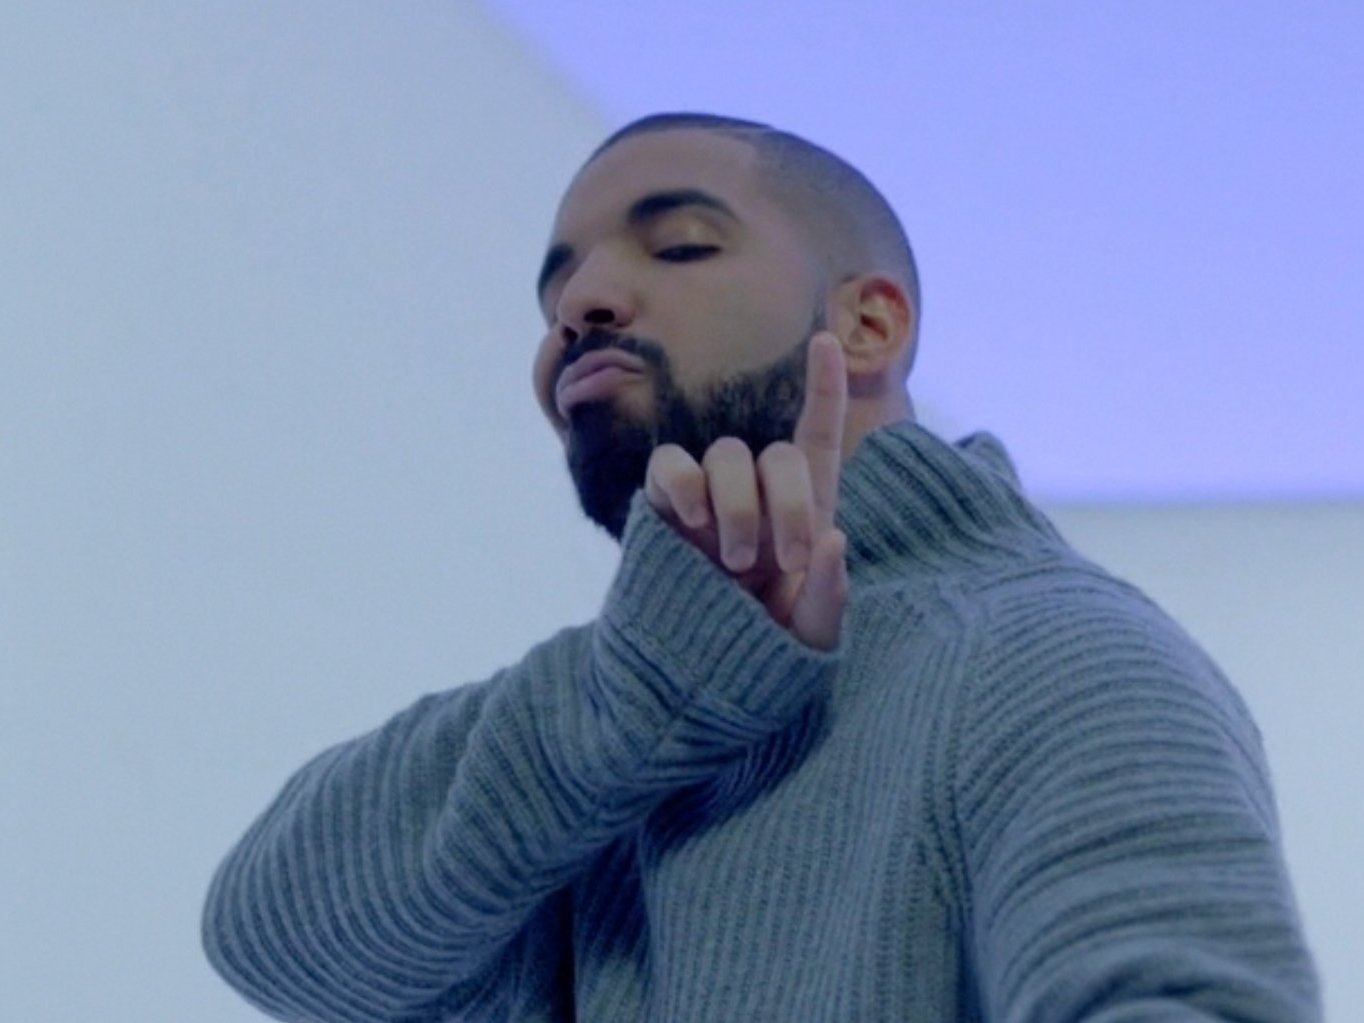 Drake Released The Video For His New Song Hotline Bling Monday And